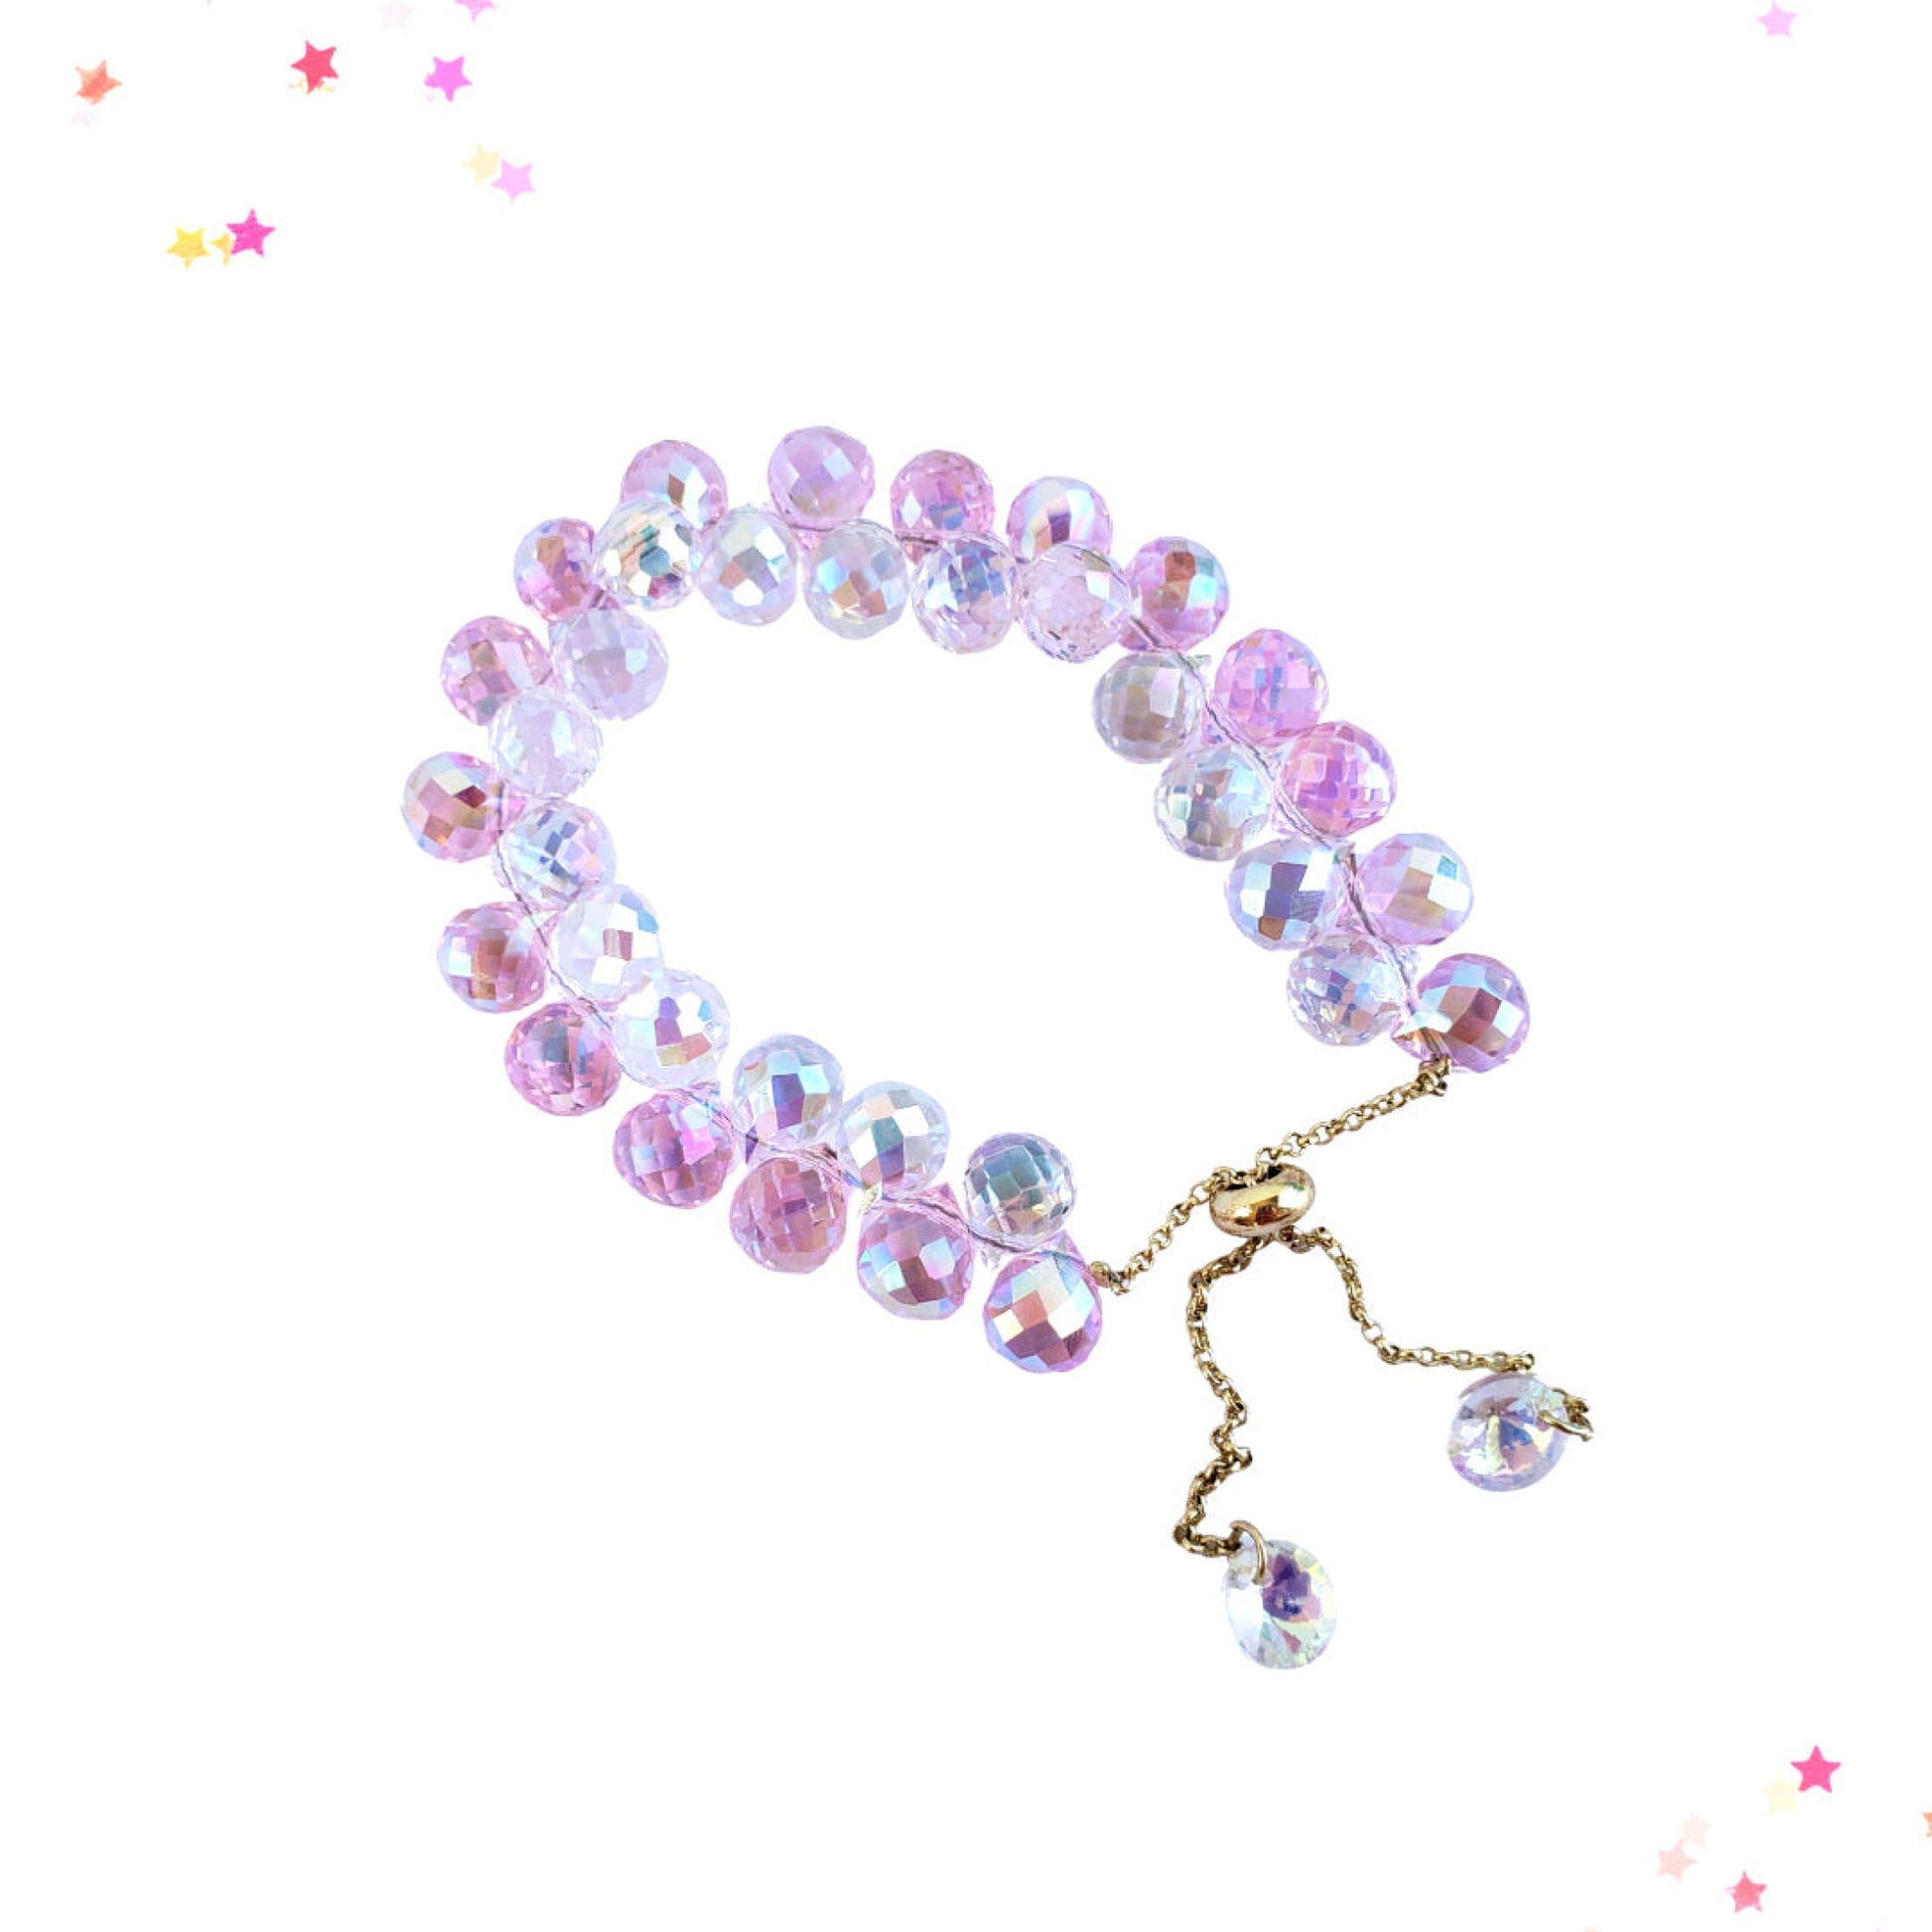 Iridescent Crystal Faceted Bead Bracelet in PInk from Confetti Kitty, Only 14.99